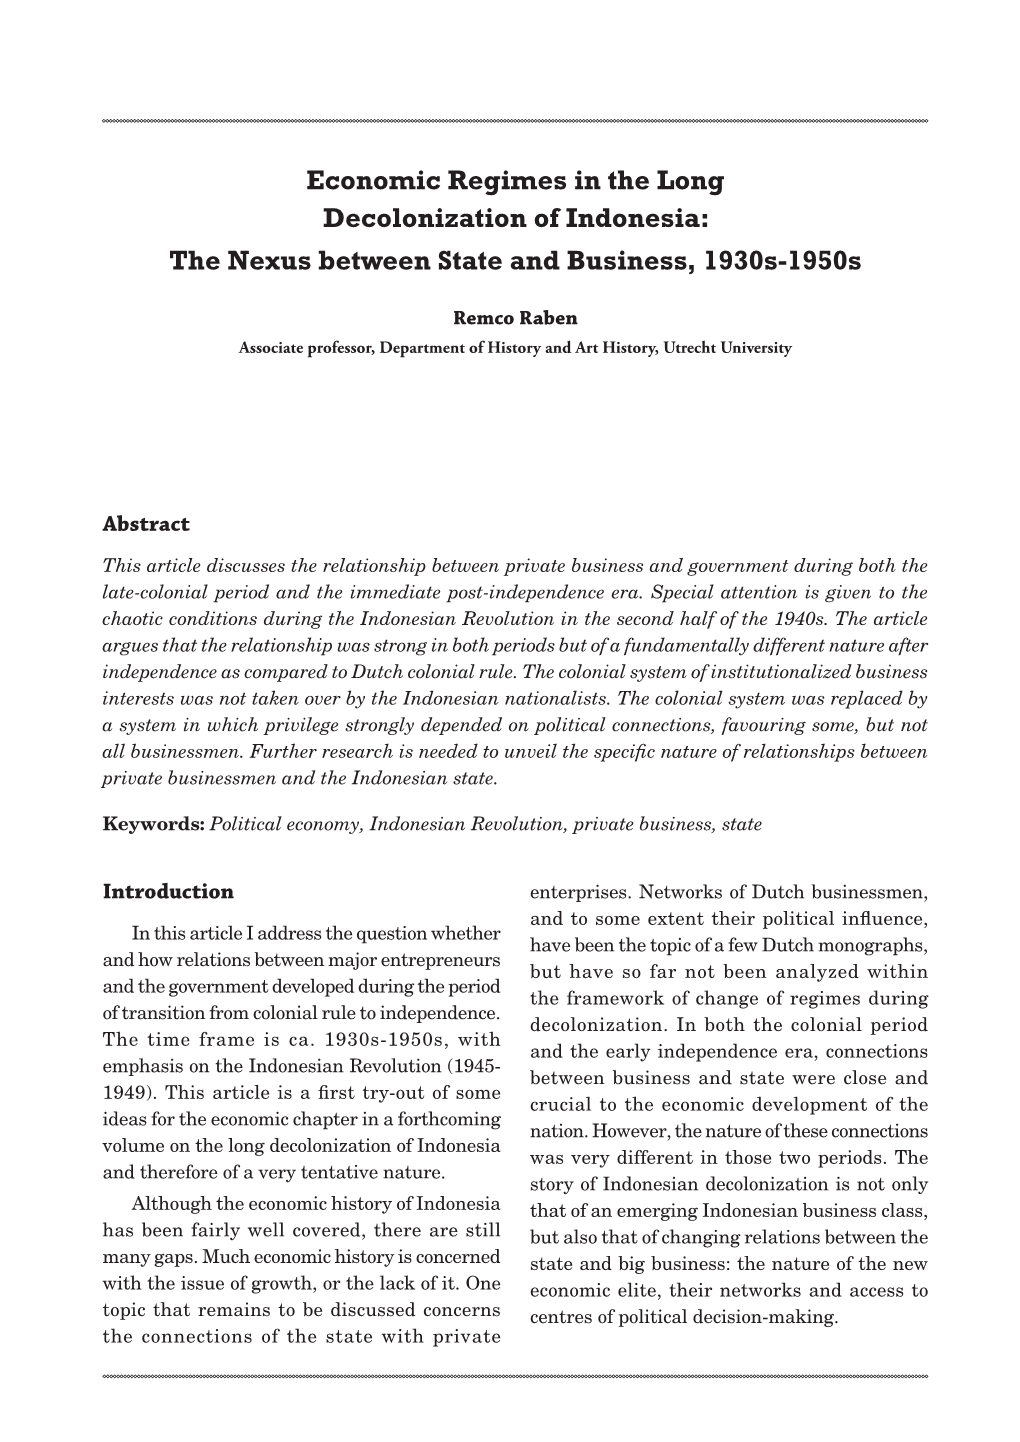 Economic Regimes in the Long Decolonization of Indonesia: the Nexus Between State and Business, 1930S-1950S